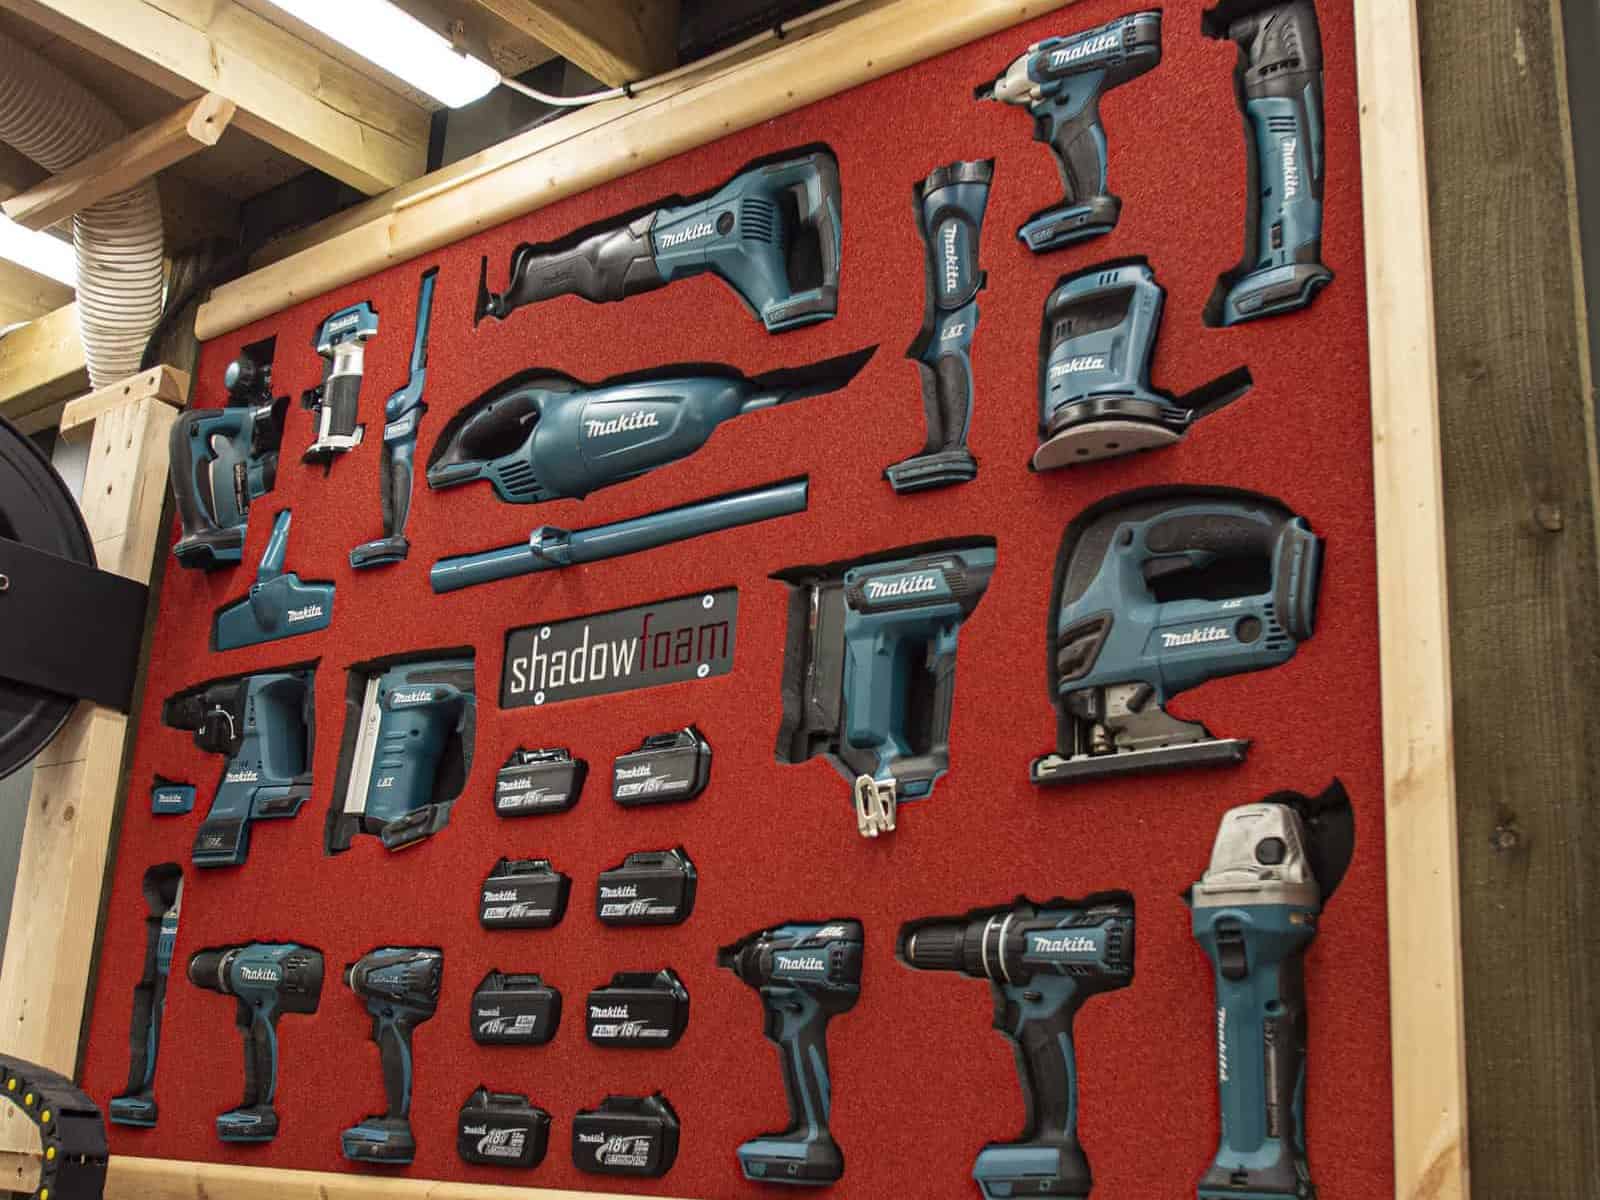 In this picture, we have used our shadow foam original which can be cut out to organise your tools, but in this picture we have used it as a power tool wall storage. The power tools are perfectly fitted into the foam for wall storage, which is fantastic for organisation. In the picture we have chosen Makita tools to add to our wall. 